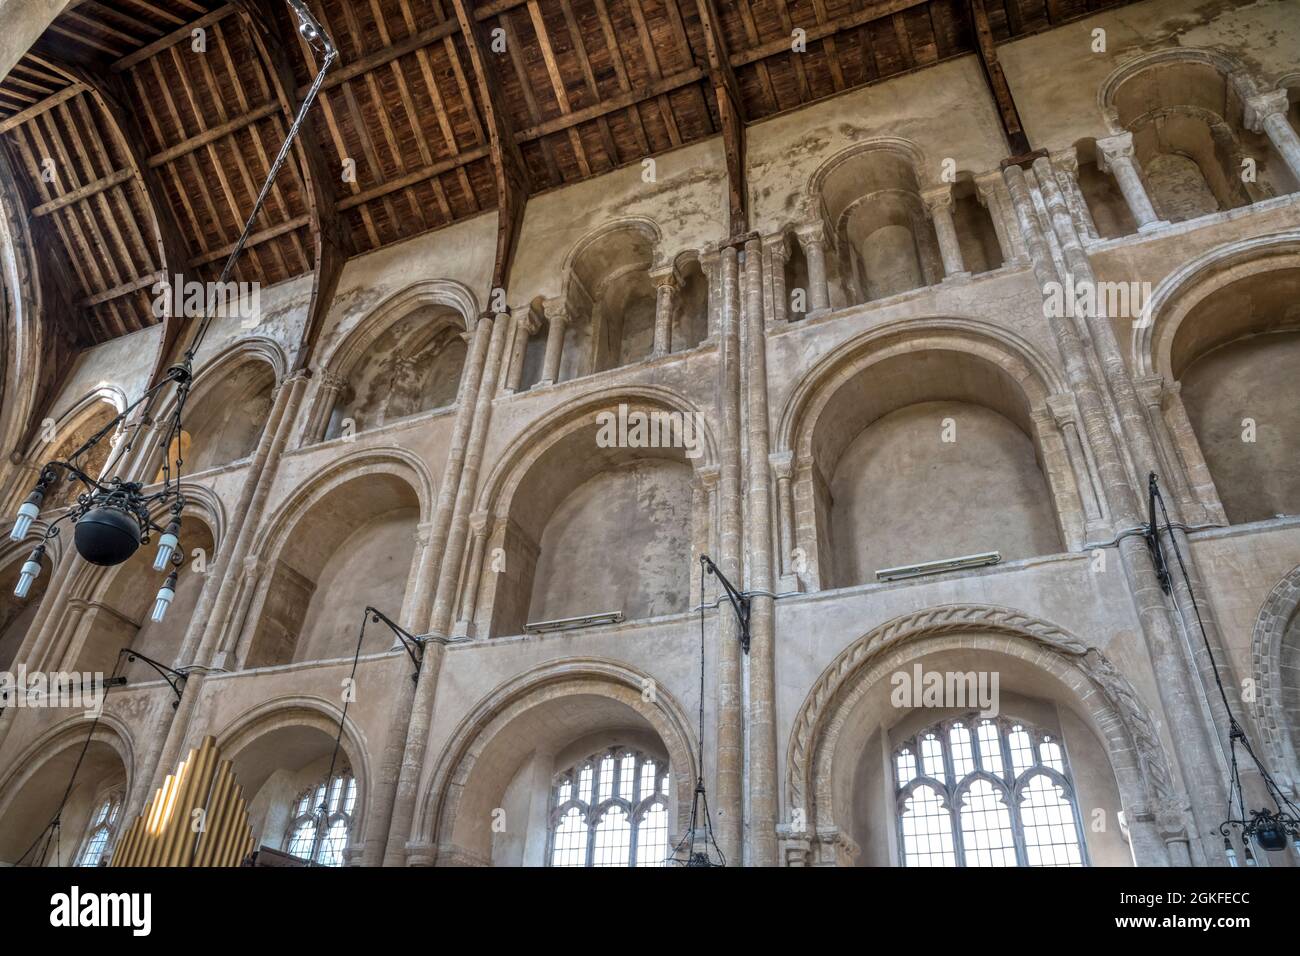 Nave arcades at Binham Priory showing changing architectural styles from Norman to Early English, rising diagonally from right to left. Stock Photo